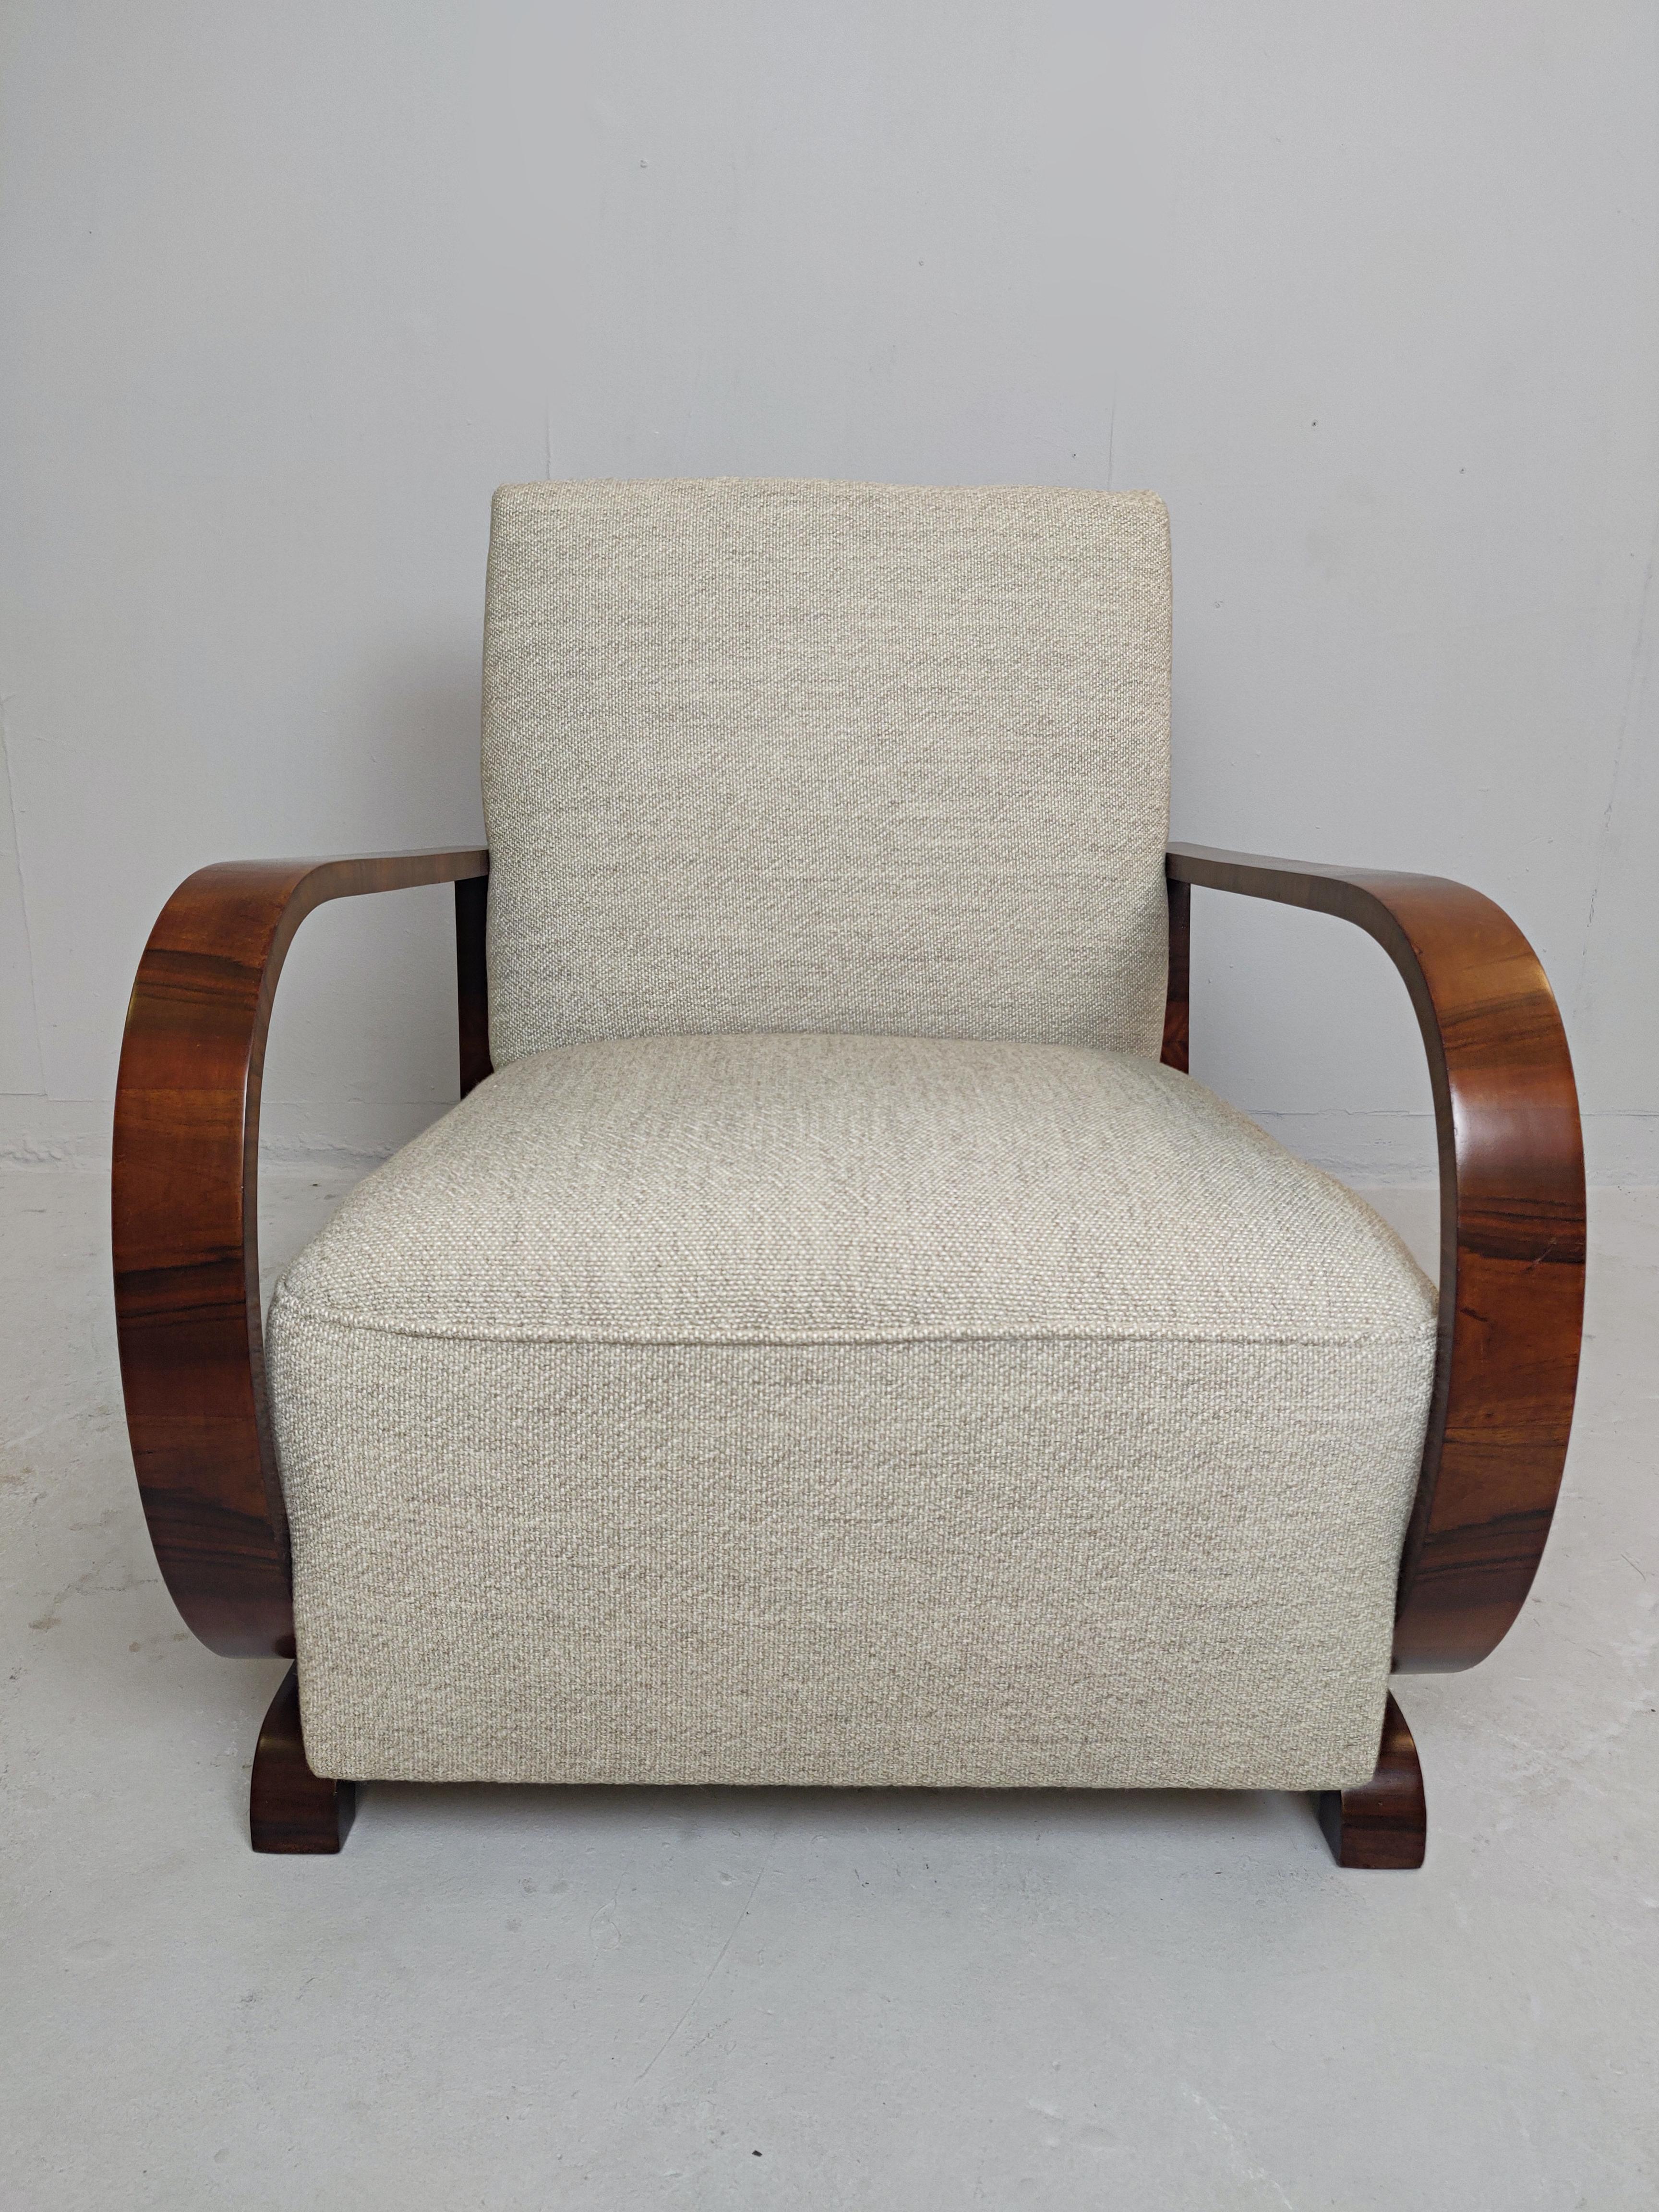 Pair of Austro-Hungarian Art Deco Armchairs, New Upholstery 1